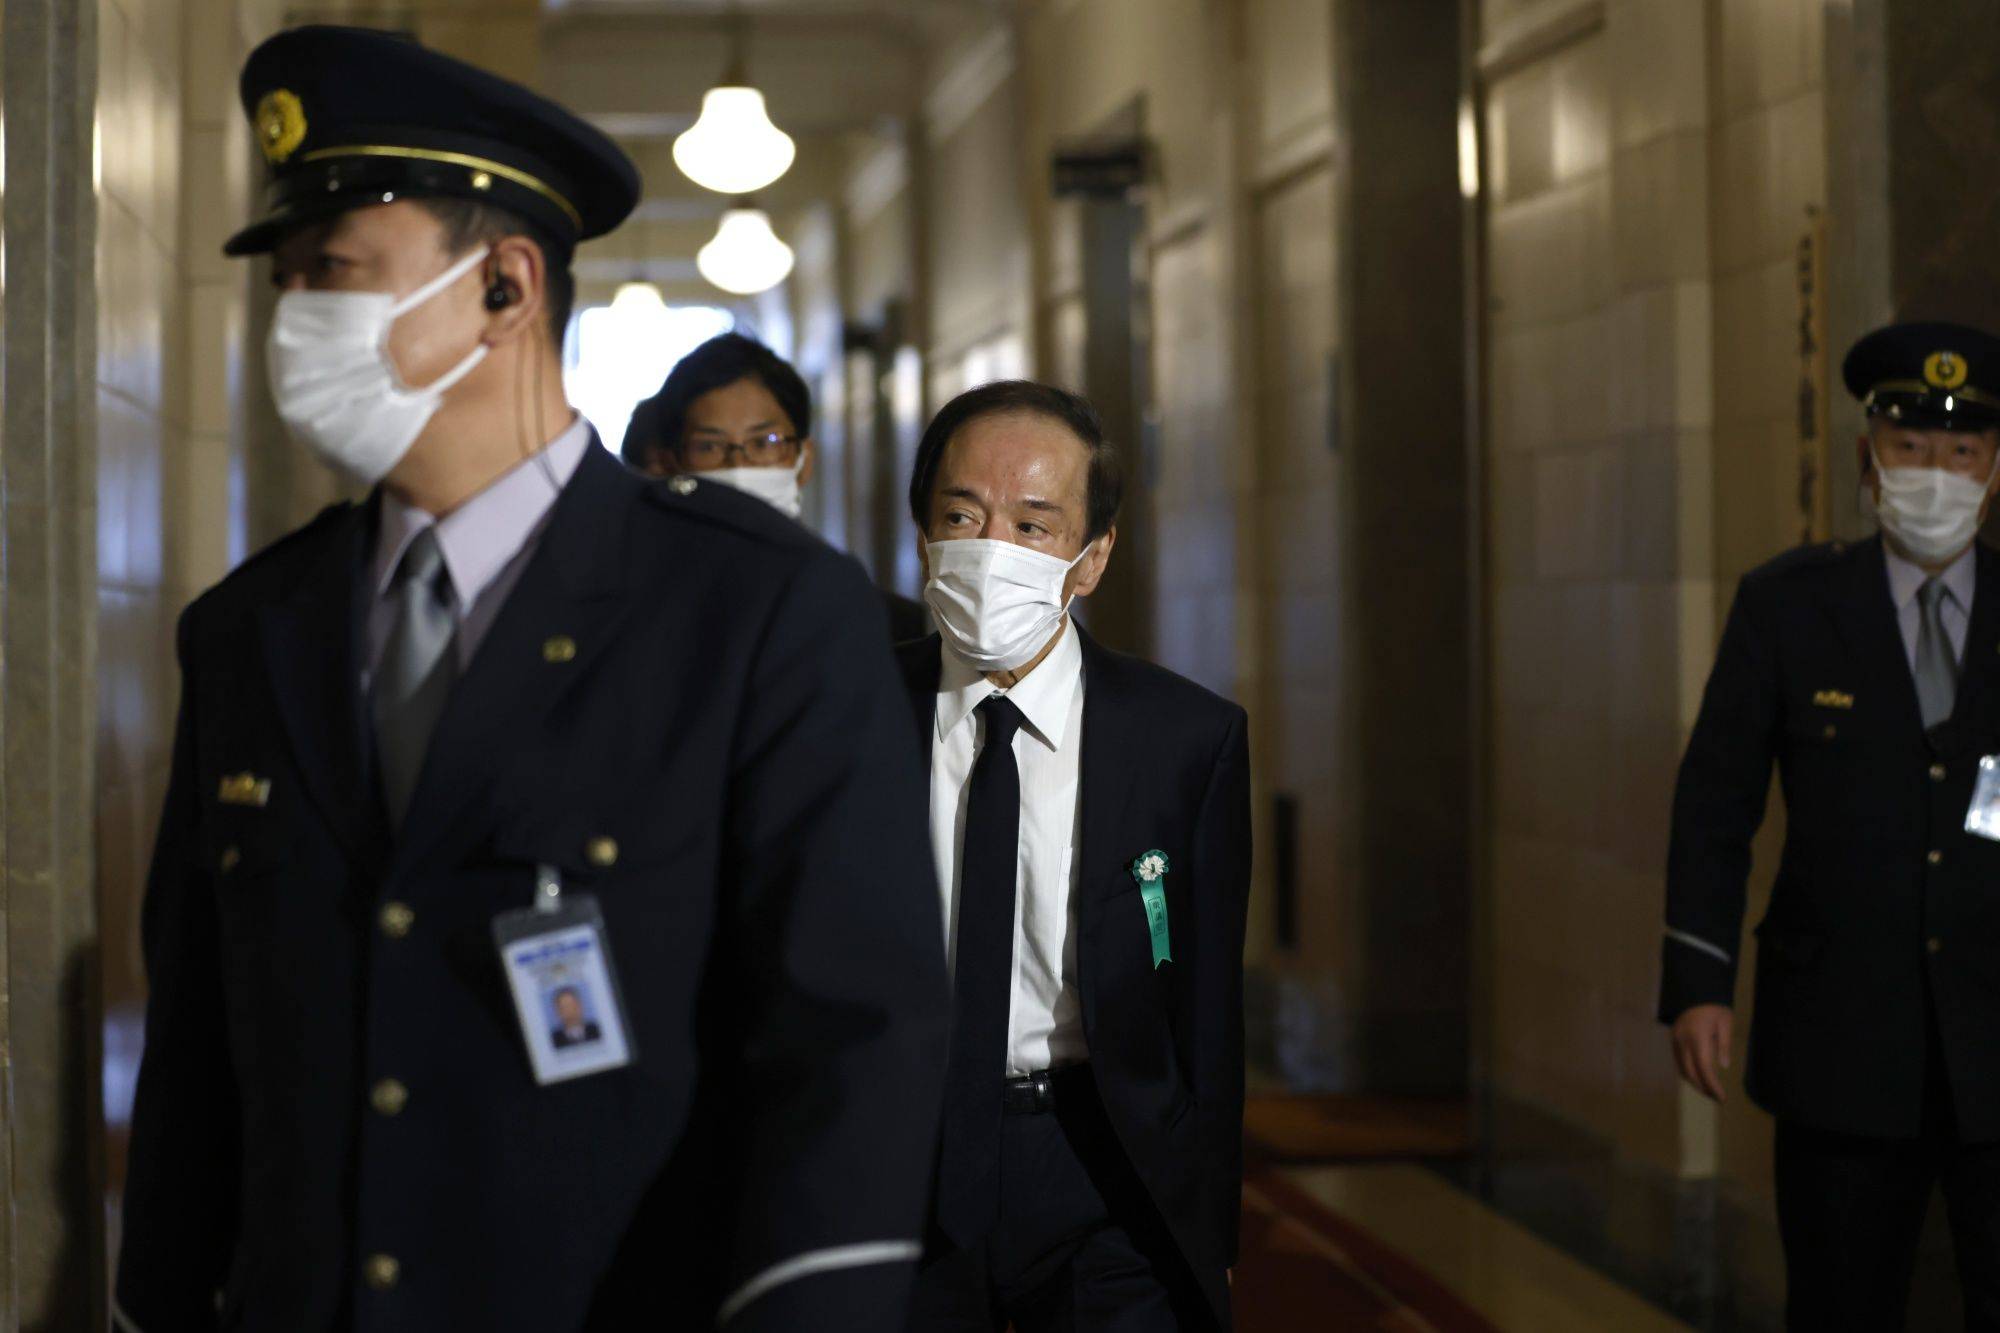 Kazuo Ueda, nominee for the governor of the Bank of Japan, arrives at the Parliament in Tokyo on Friday. | BLOOMBERG